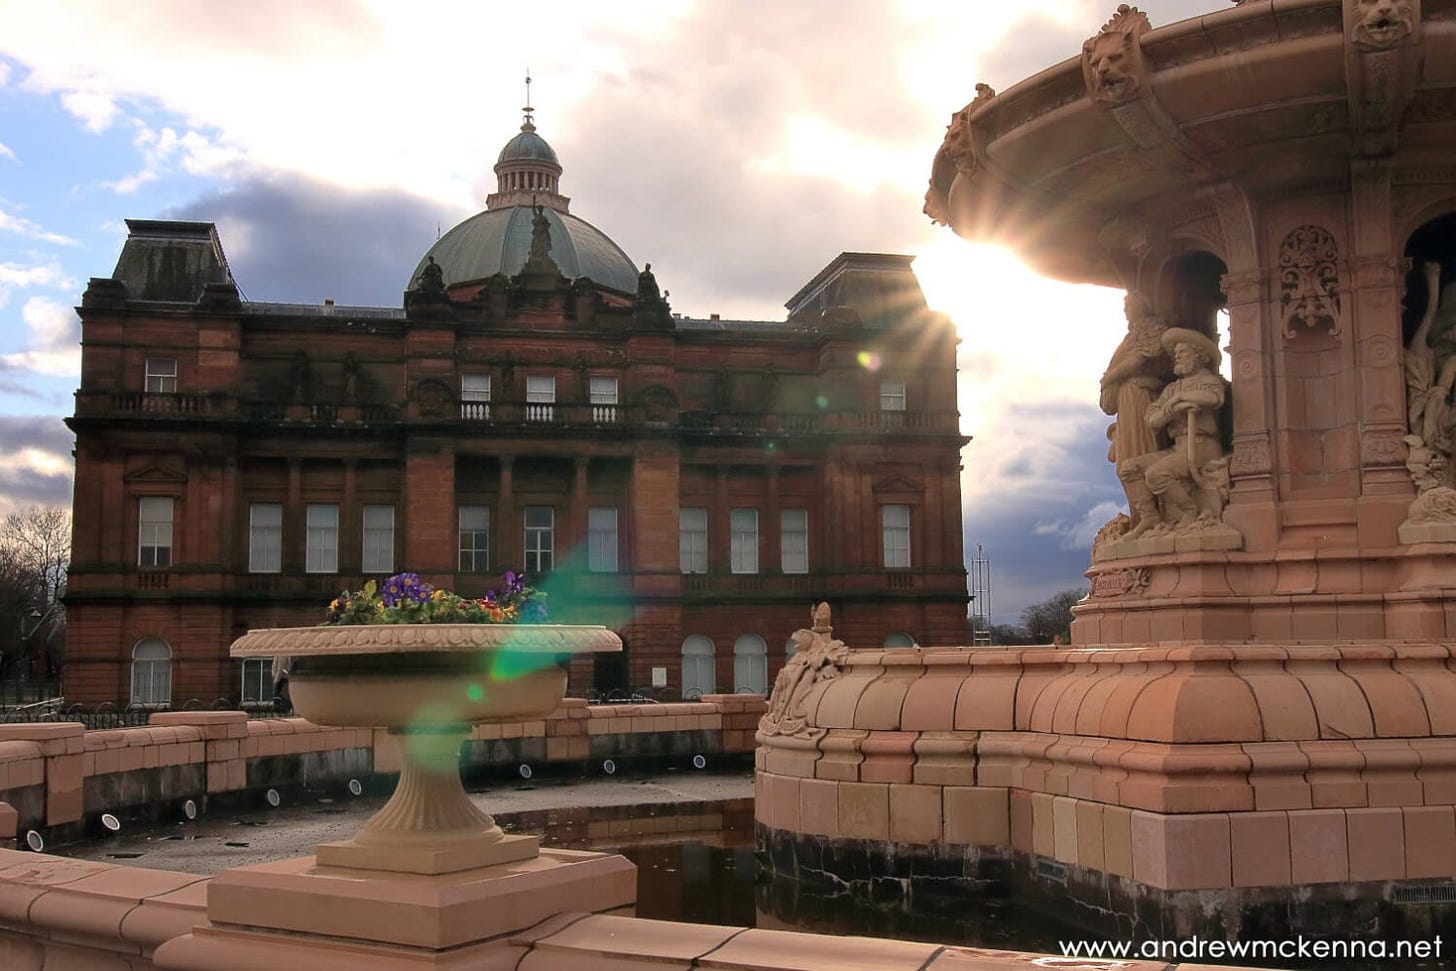 The People's Palace and the Doulton Fountain with the sun casting a lens flare across the frame from right to left.